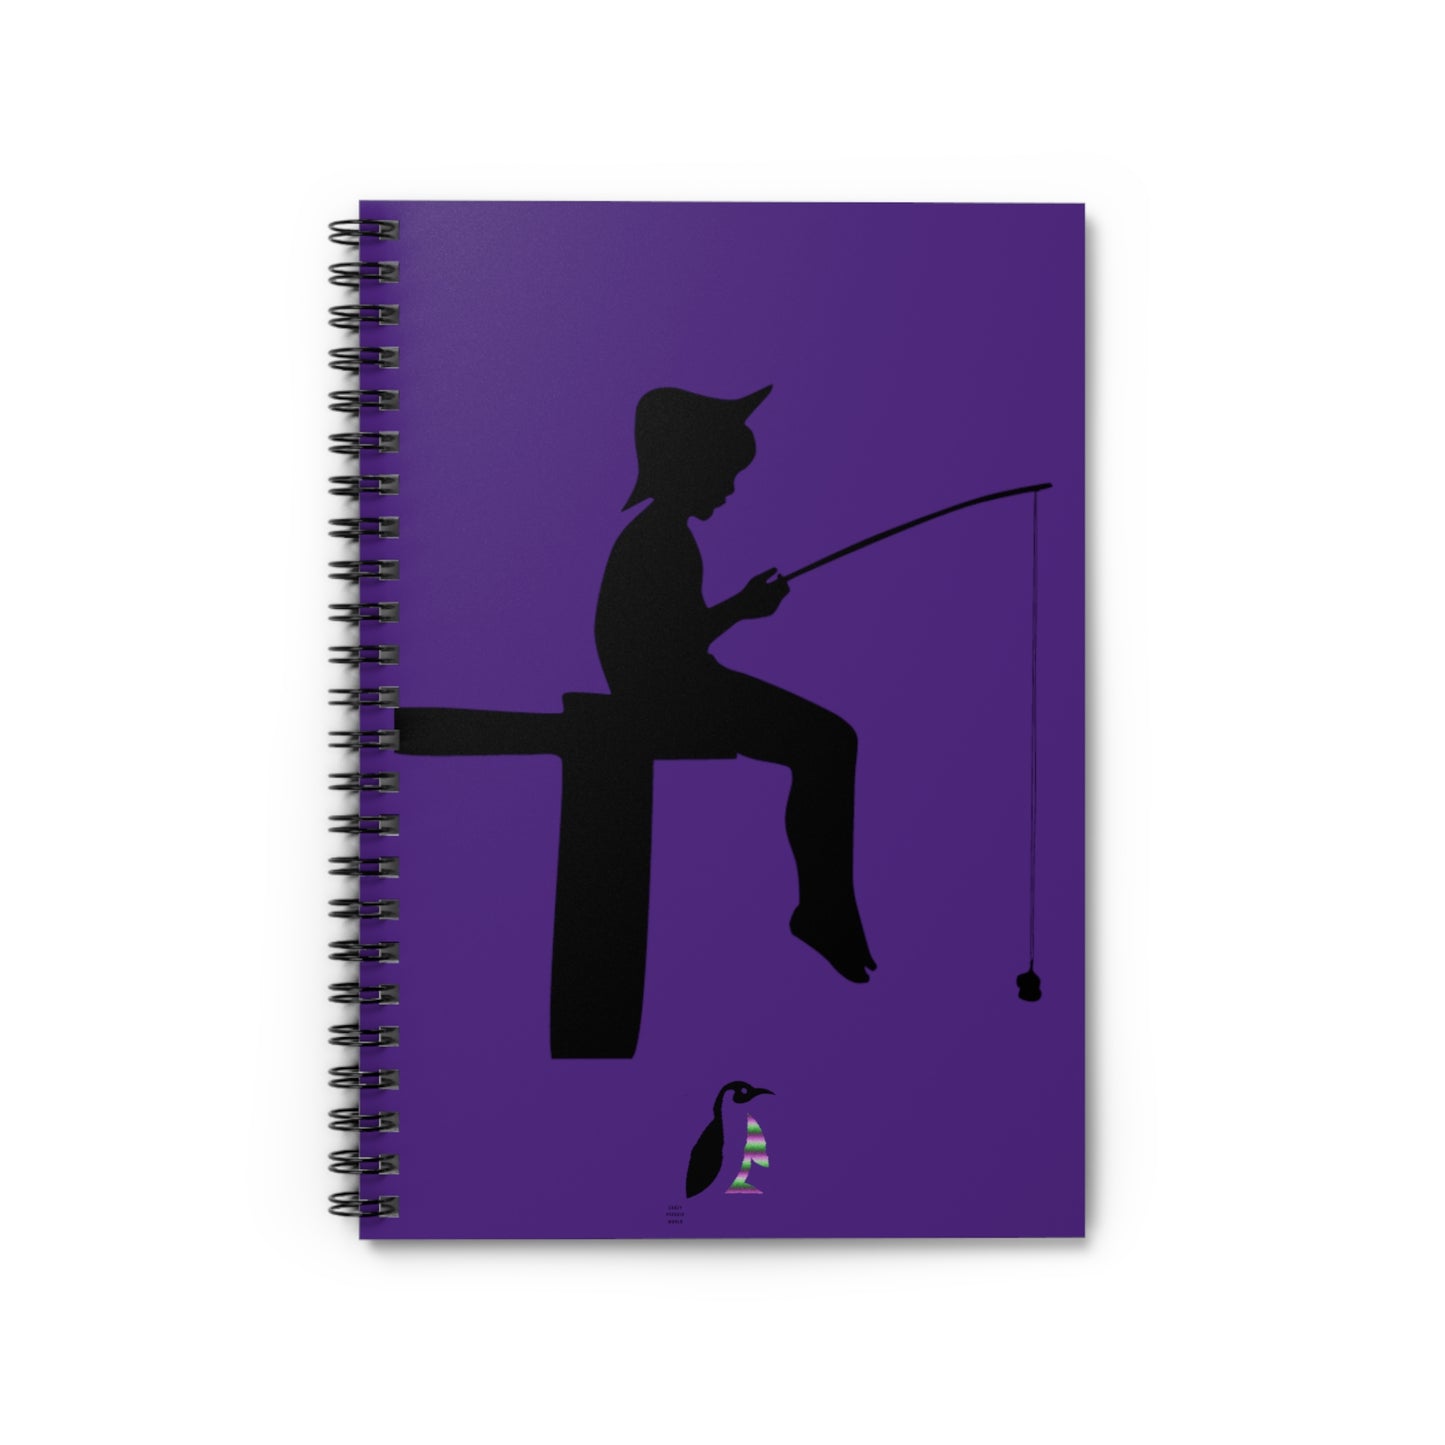 Spiral Notebook - Ruled Line: Fishing Purple